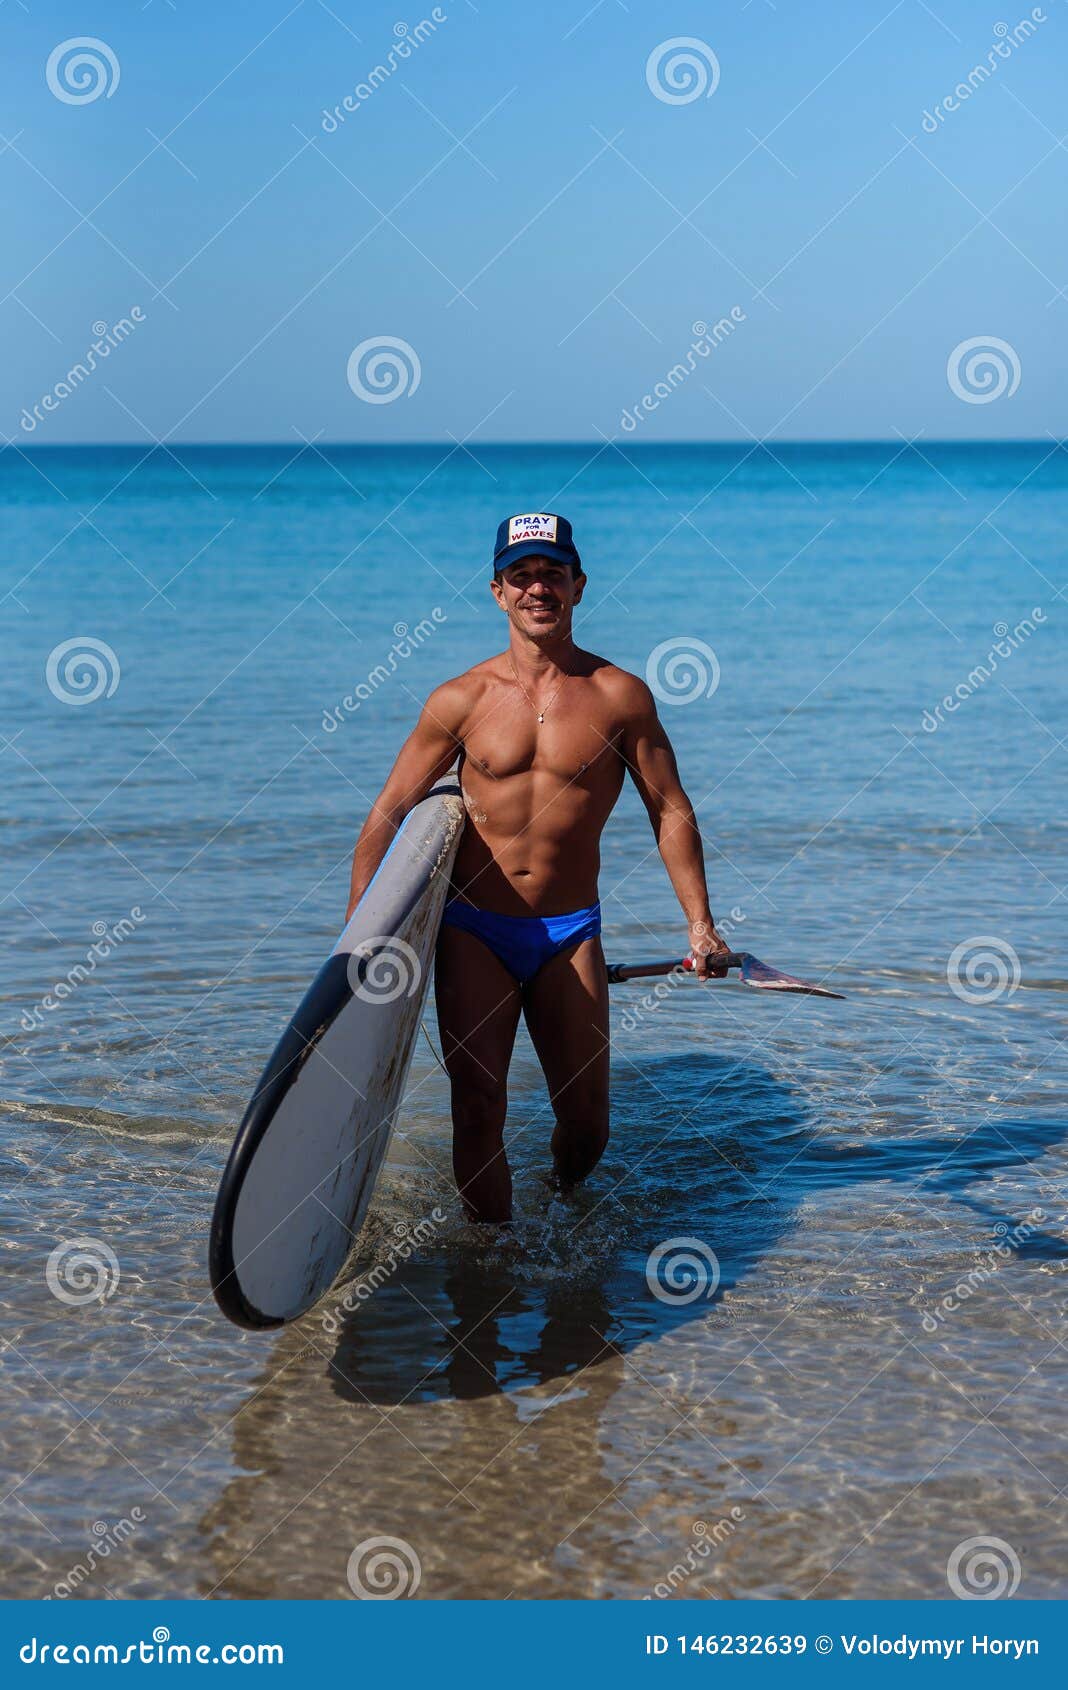 Tanned Man on the Beach of the Sea with a Surfboard and Oar in His ...